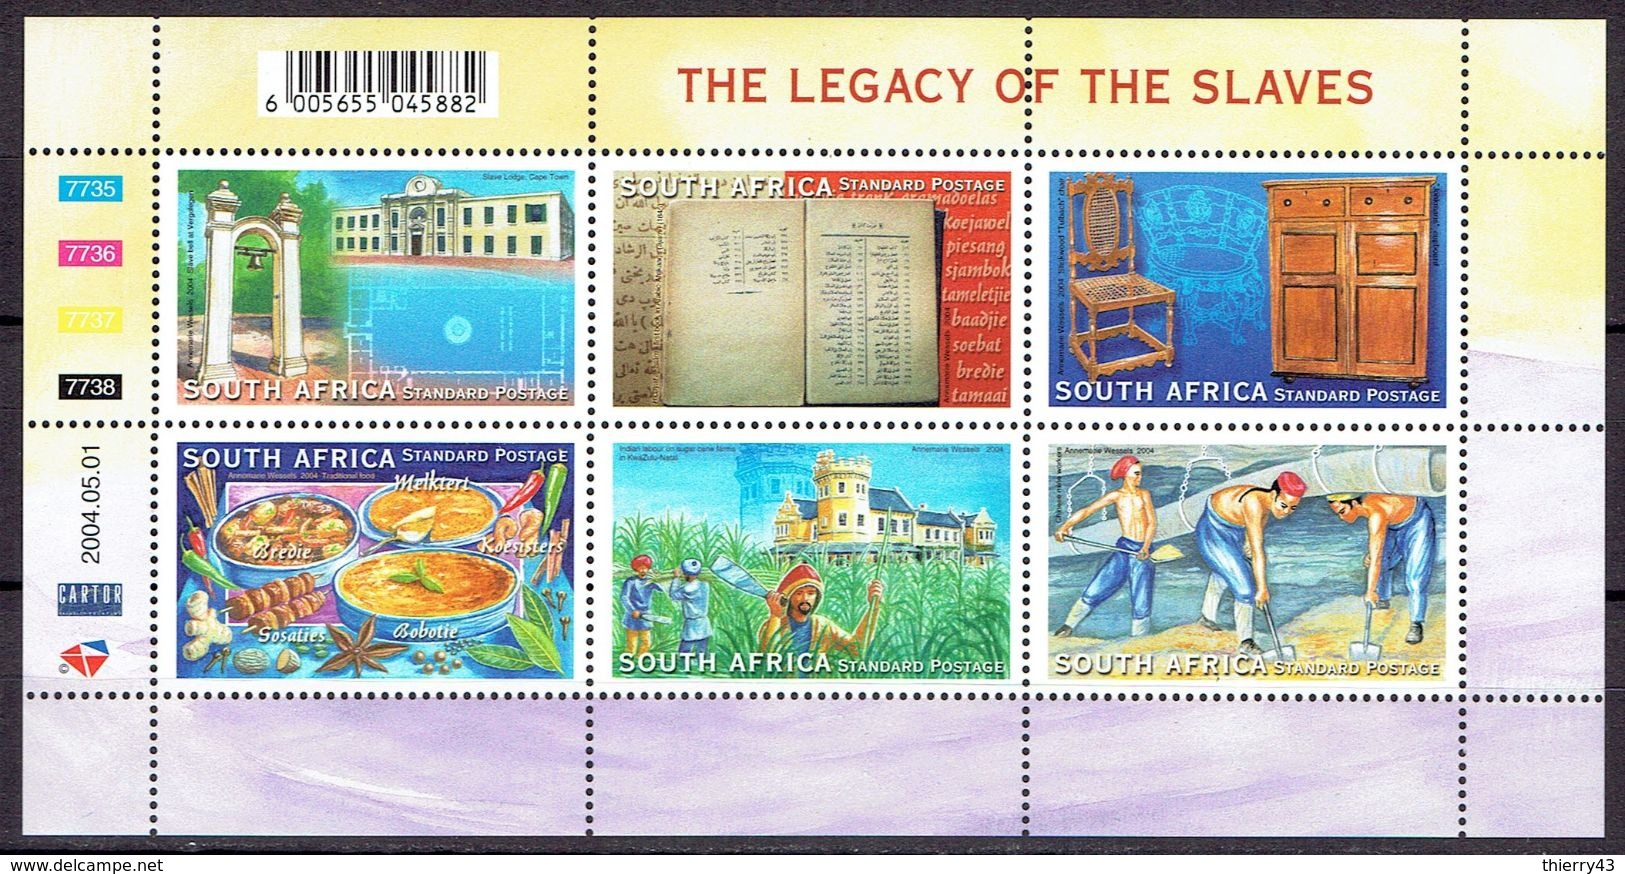 South Africa 2004 - The Legacy Of The Slaves, Sheet - Michel 1558-63 -  MNH, NEUF, Postfrisch - Neufs